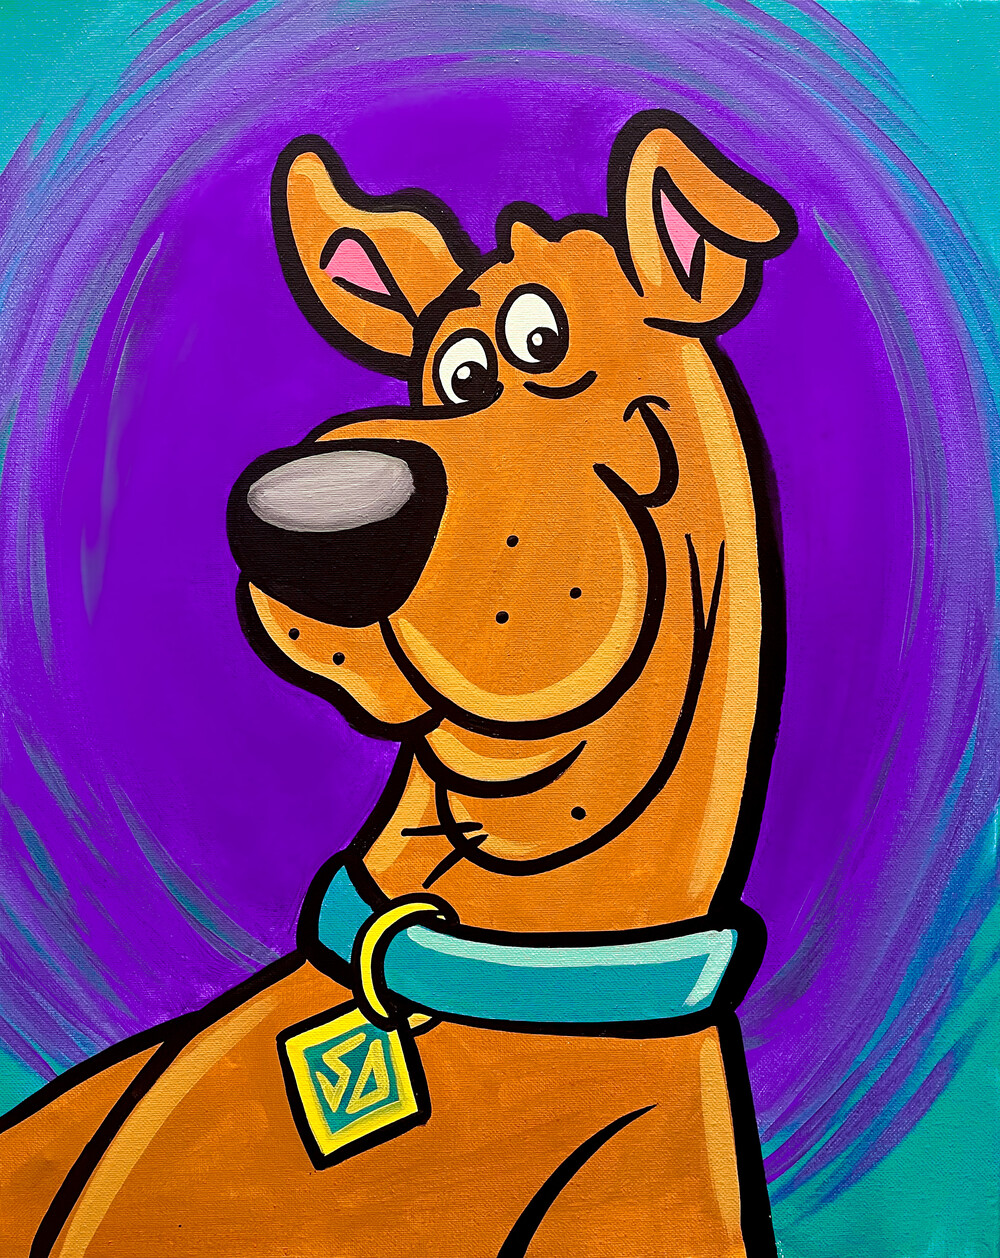 Scooby Doo Painting Class - Muse National Harbor